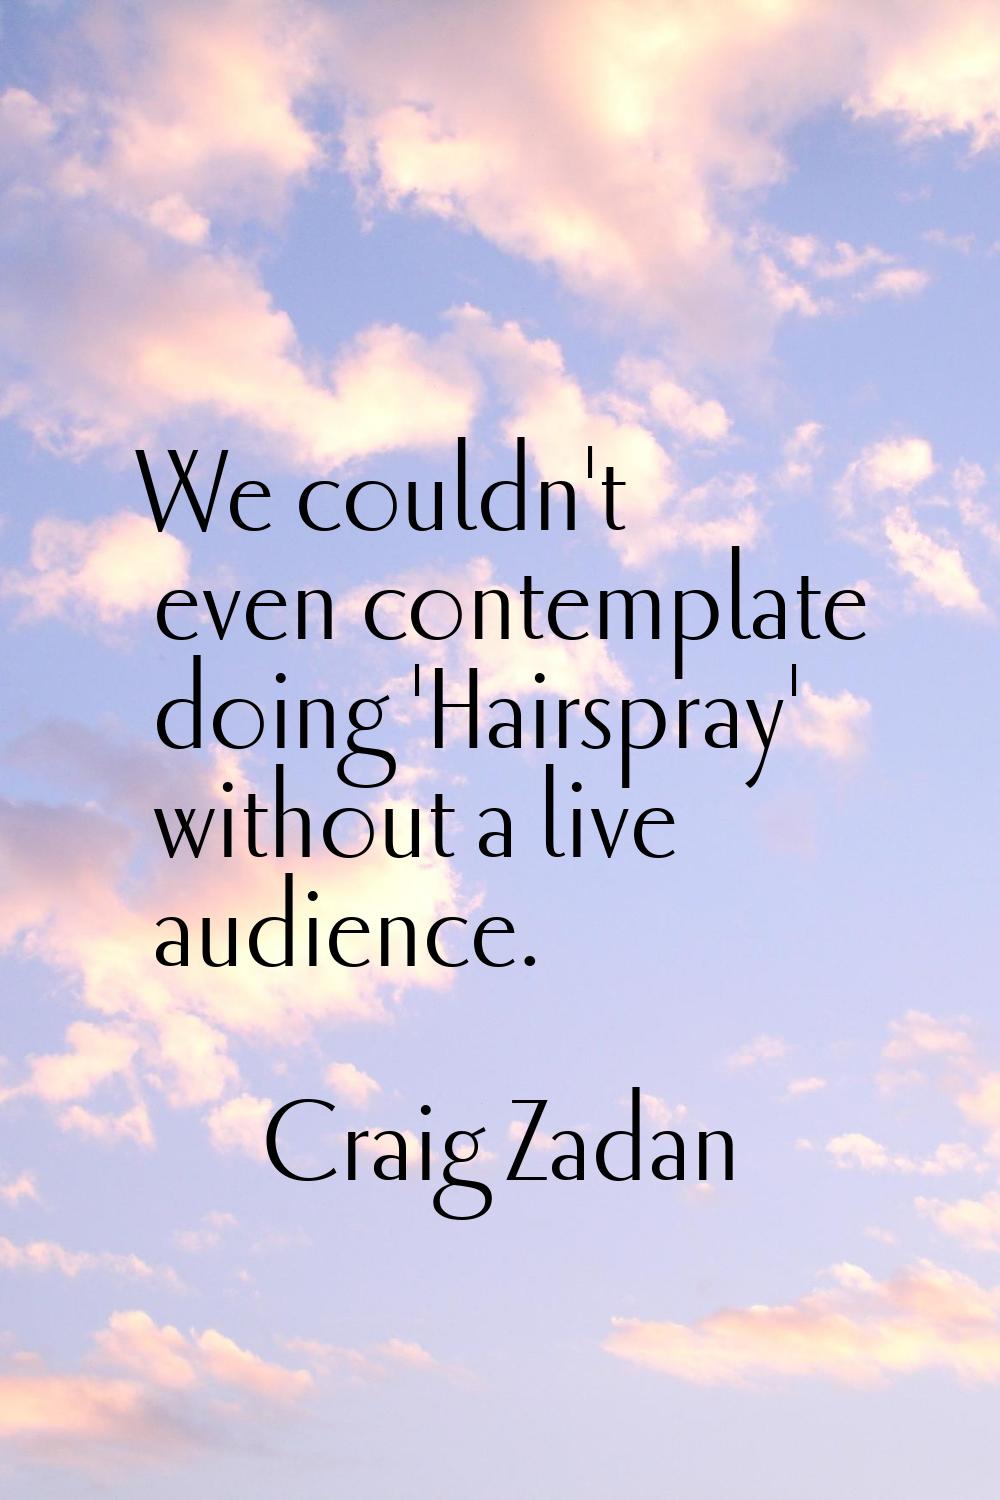 We couldn't even contemplate doing 'Hairspray' without a live audience.